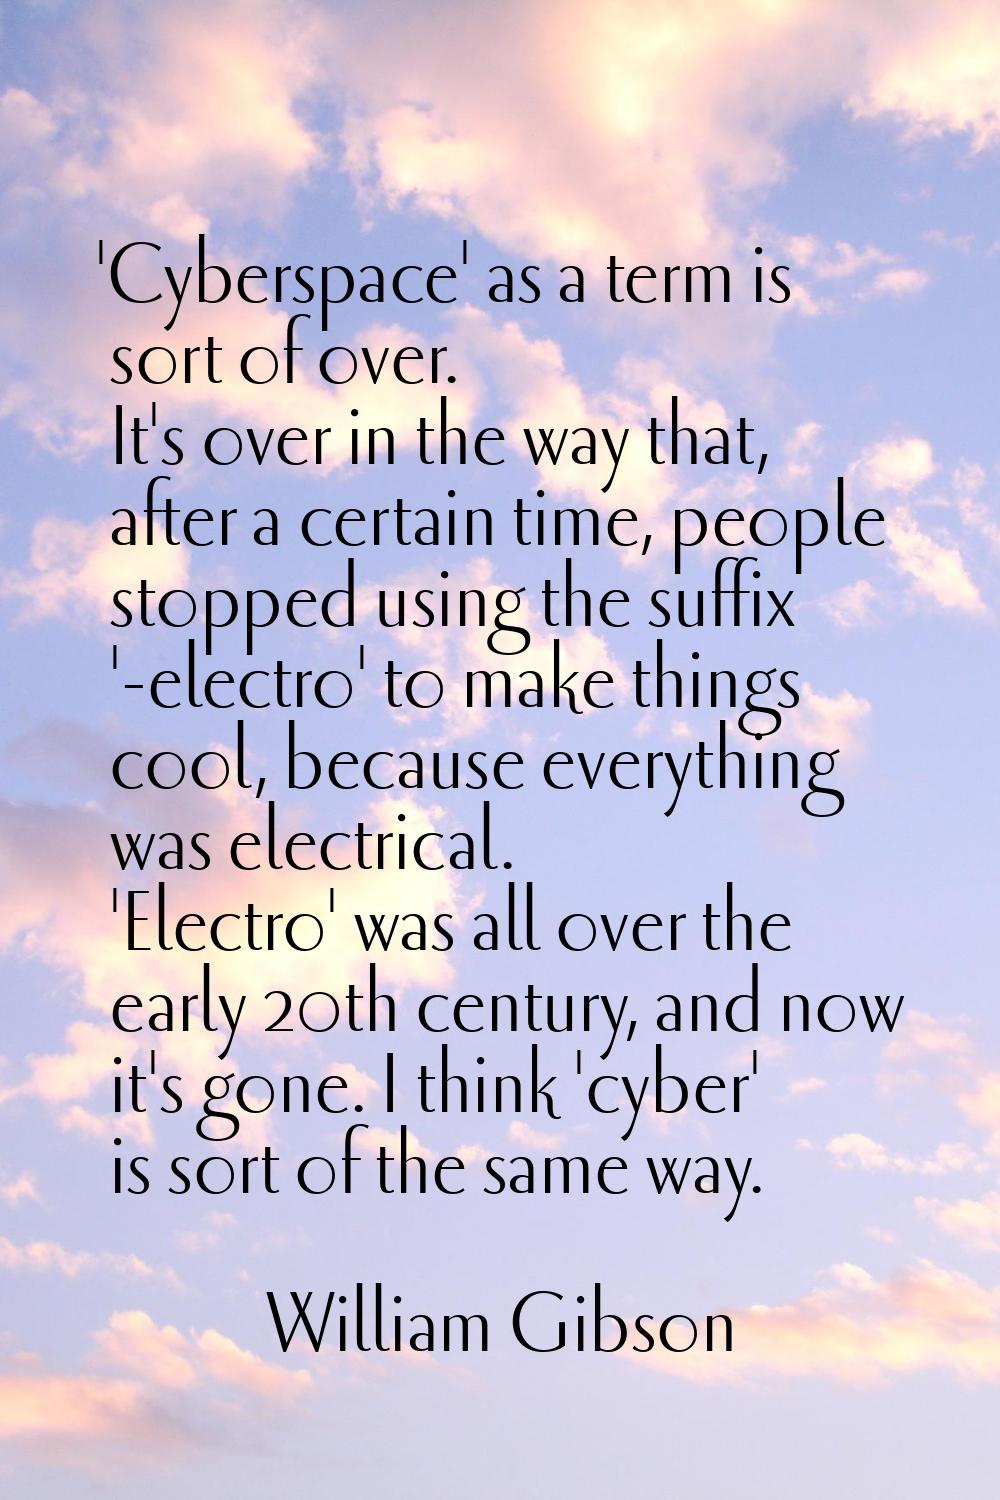 'Cyberspace' as a term is sort of over. It's over in the way that, after a certain time, people sto